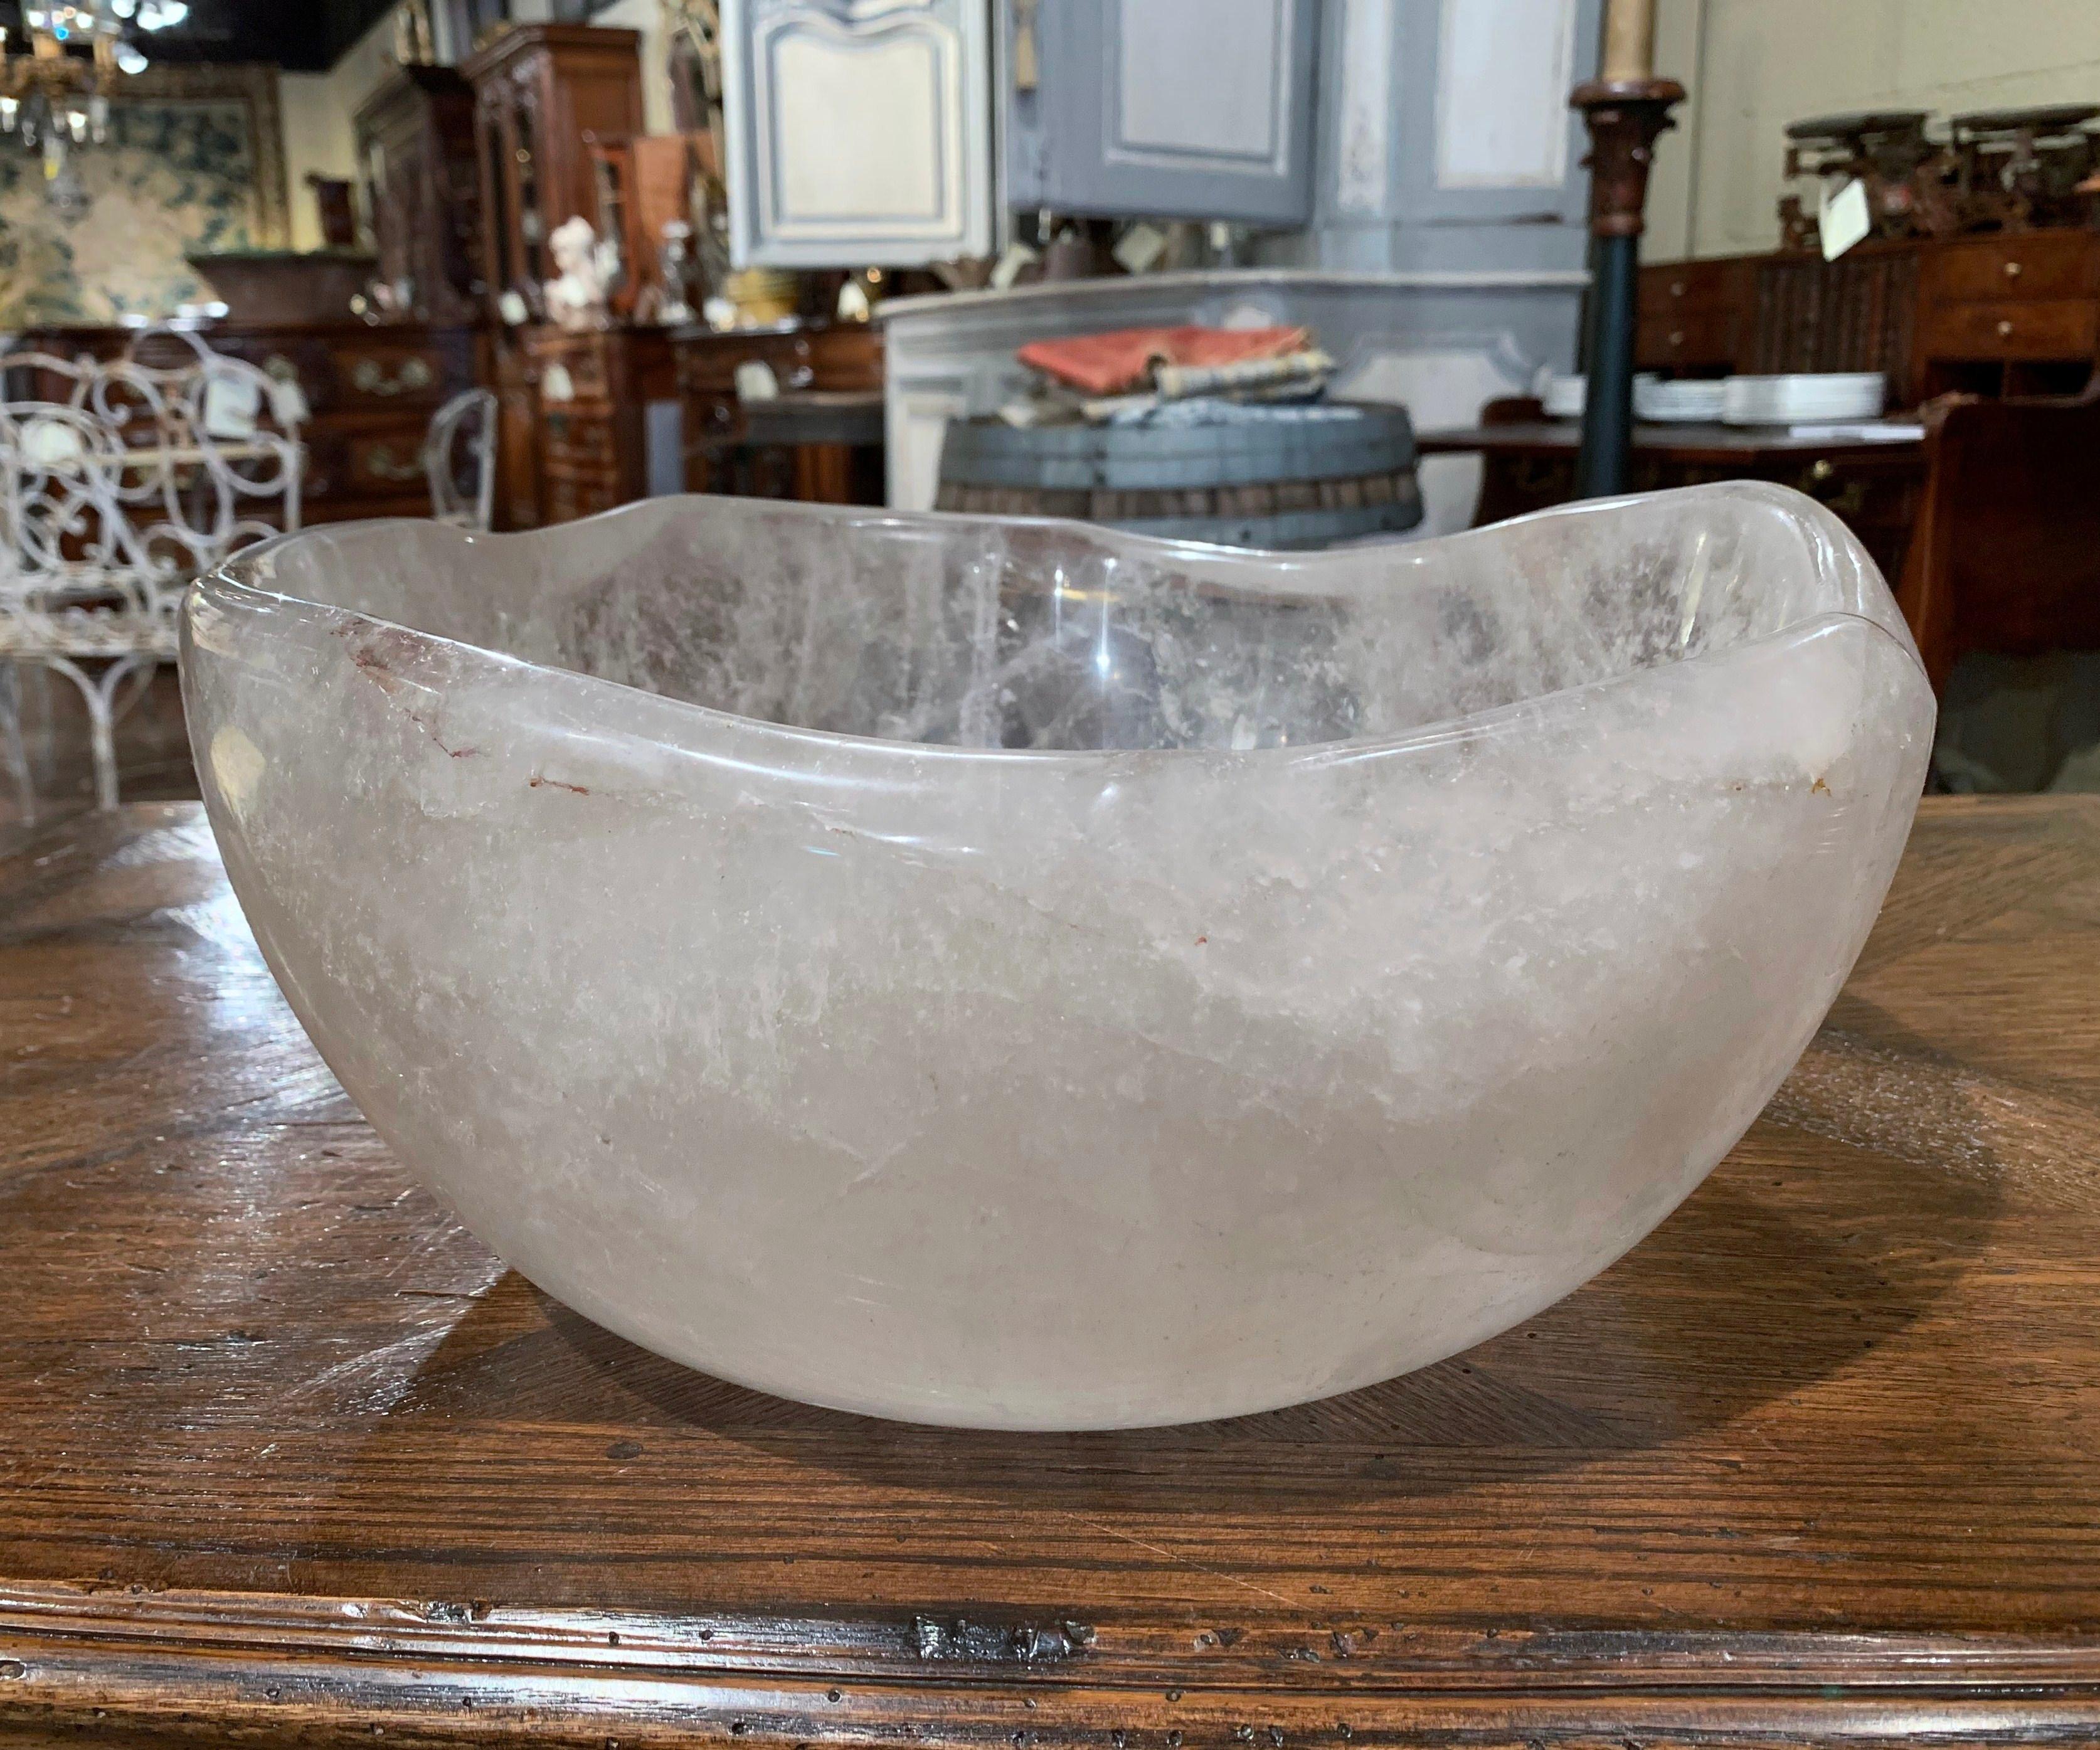 This large carved rock crystal center bowl was crafted in Brazil; the heavy bowl with scalloped edges is in excellent condition with a rich patinated finish.
Measures: 13.25